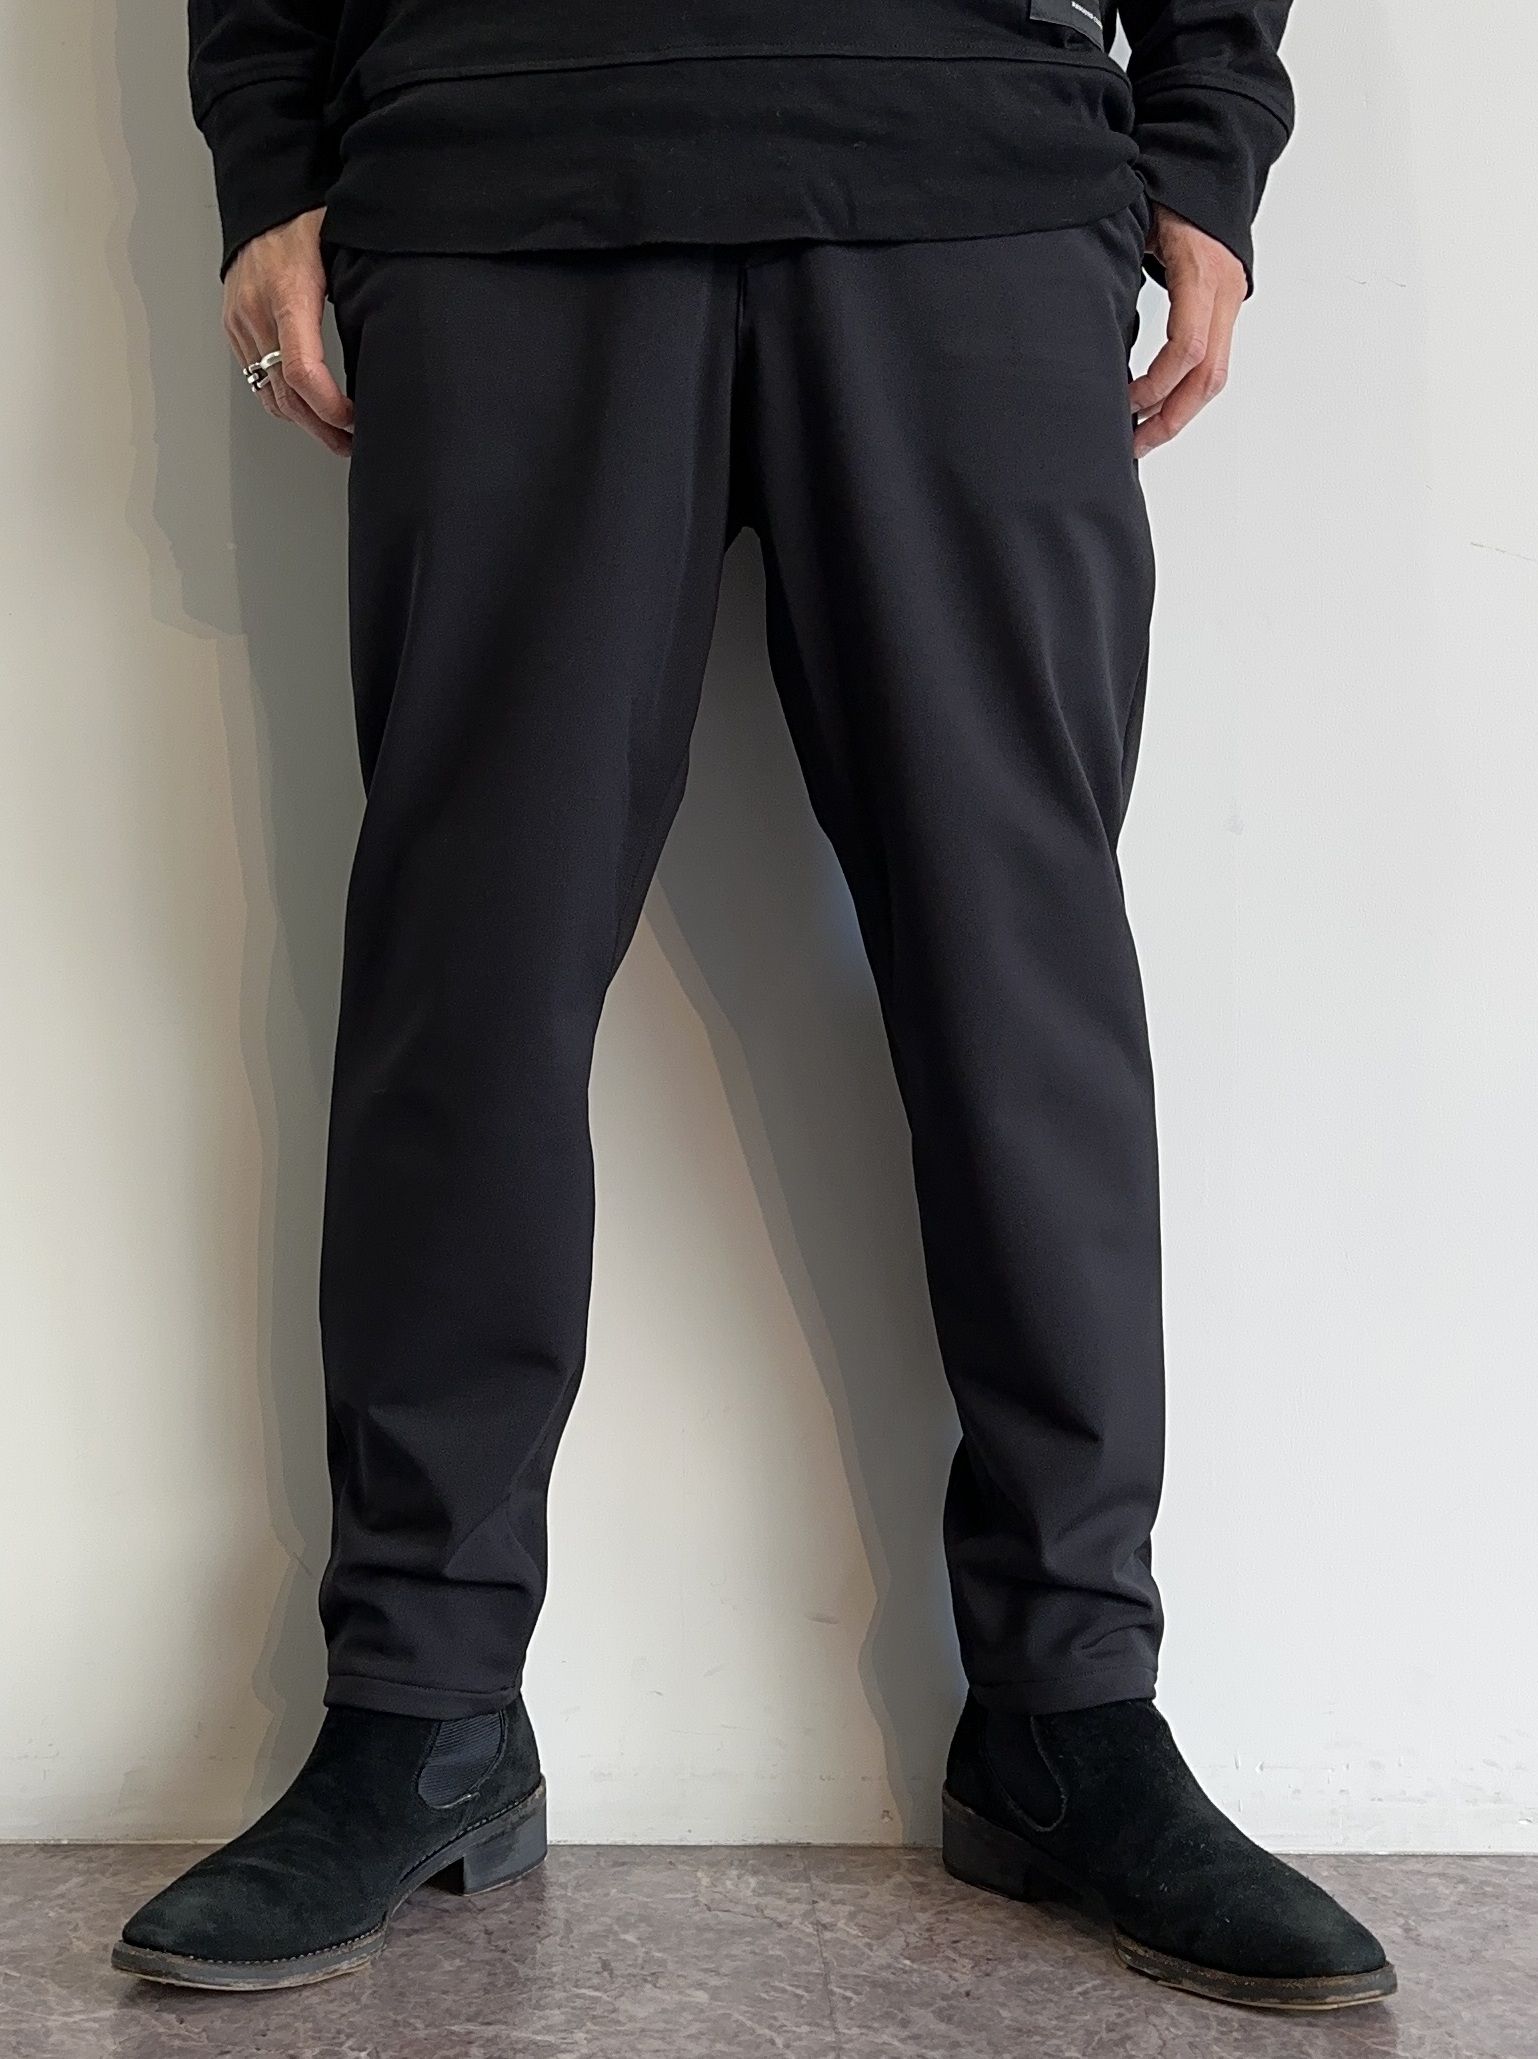 RESOUND CLOTHING - PAT WIDE EASY PANTS / RC30-ST-036H / ベルト付き